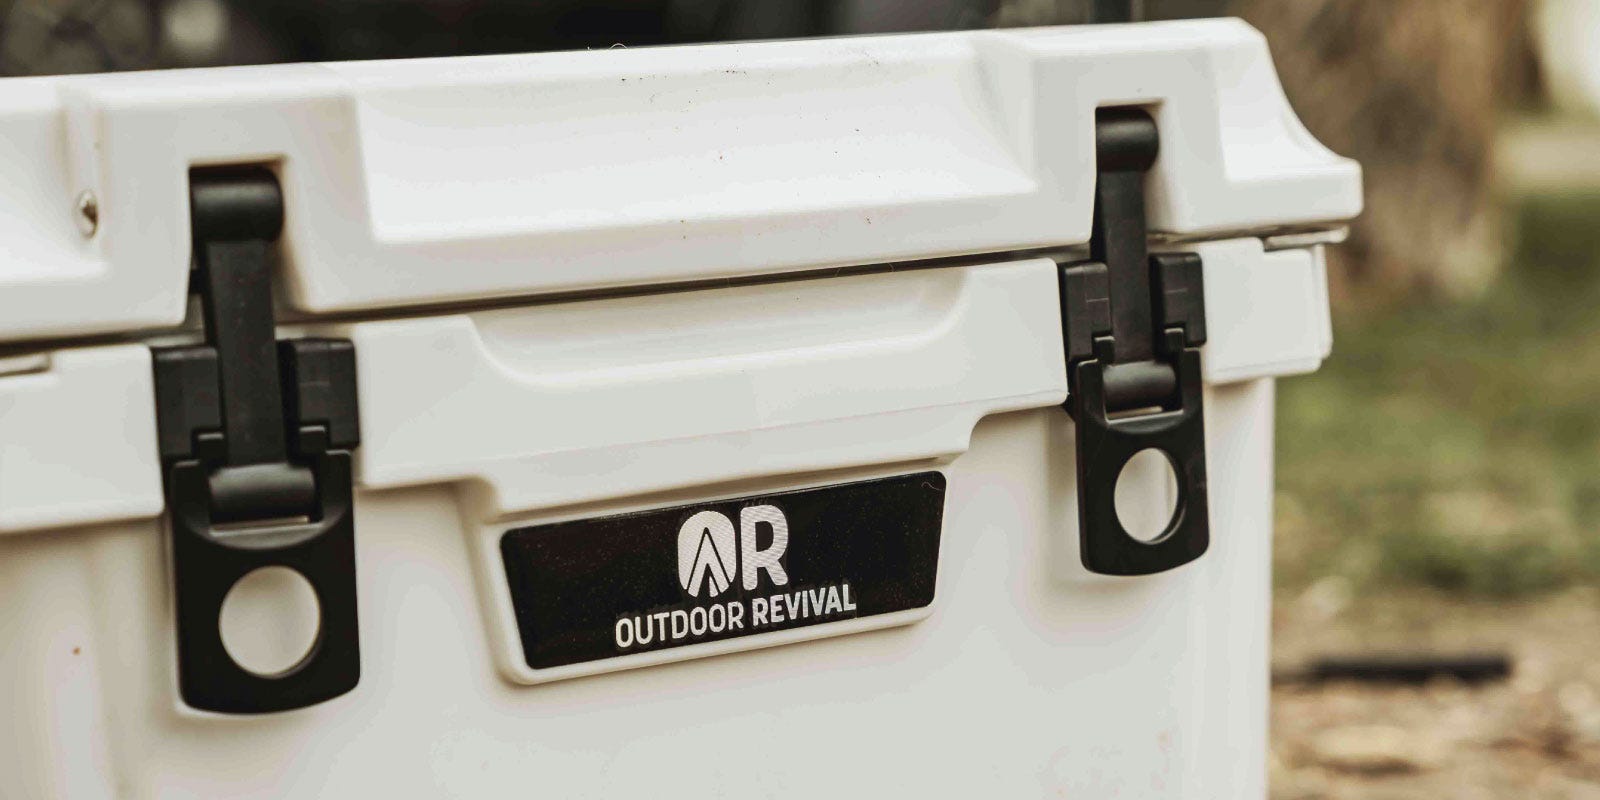 Close up of brand tag on a white colored Outdoor Revival cooler